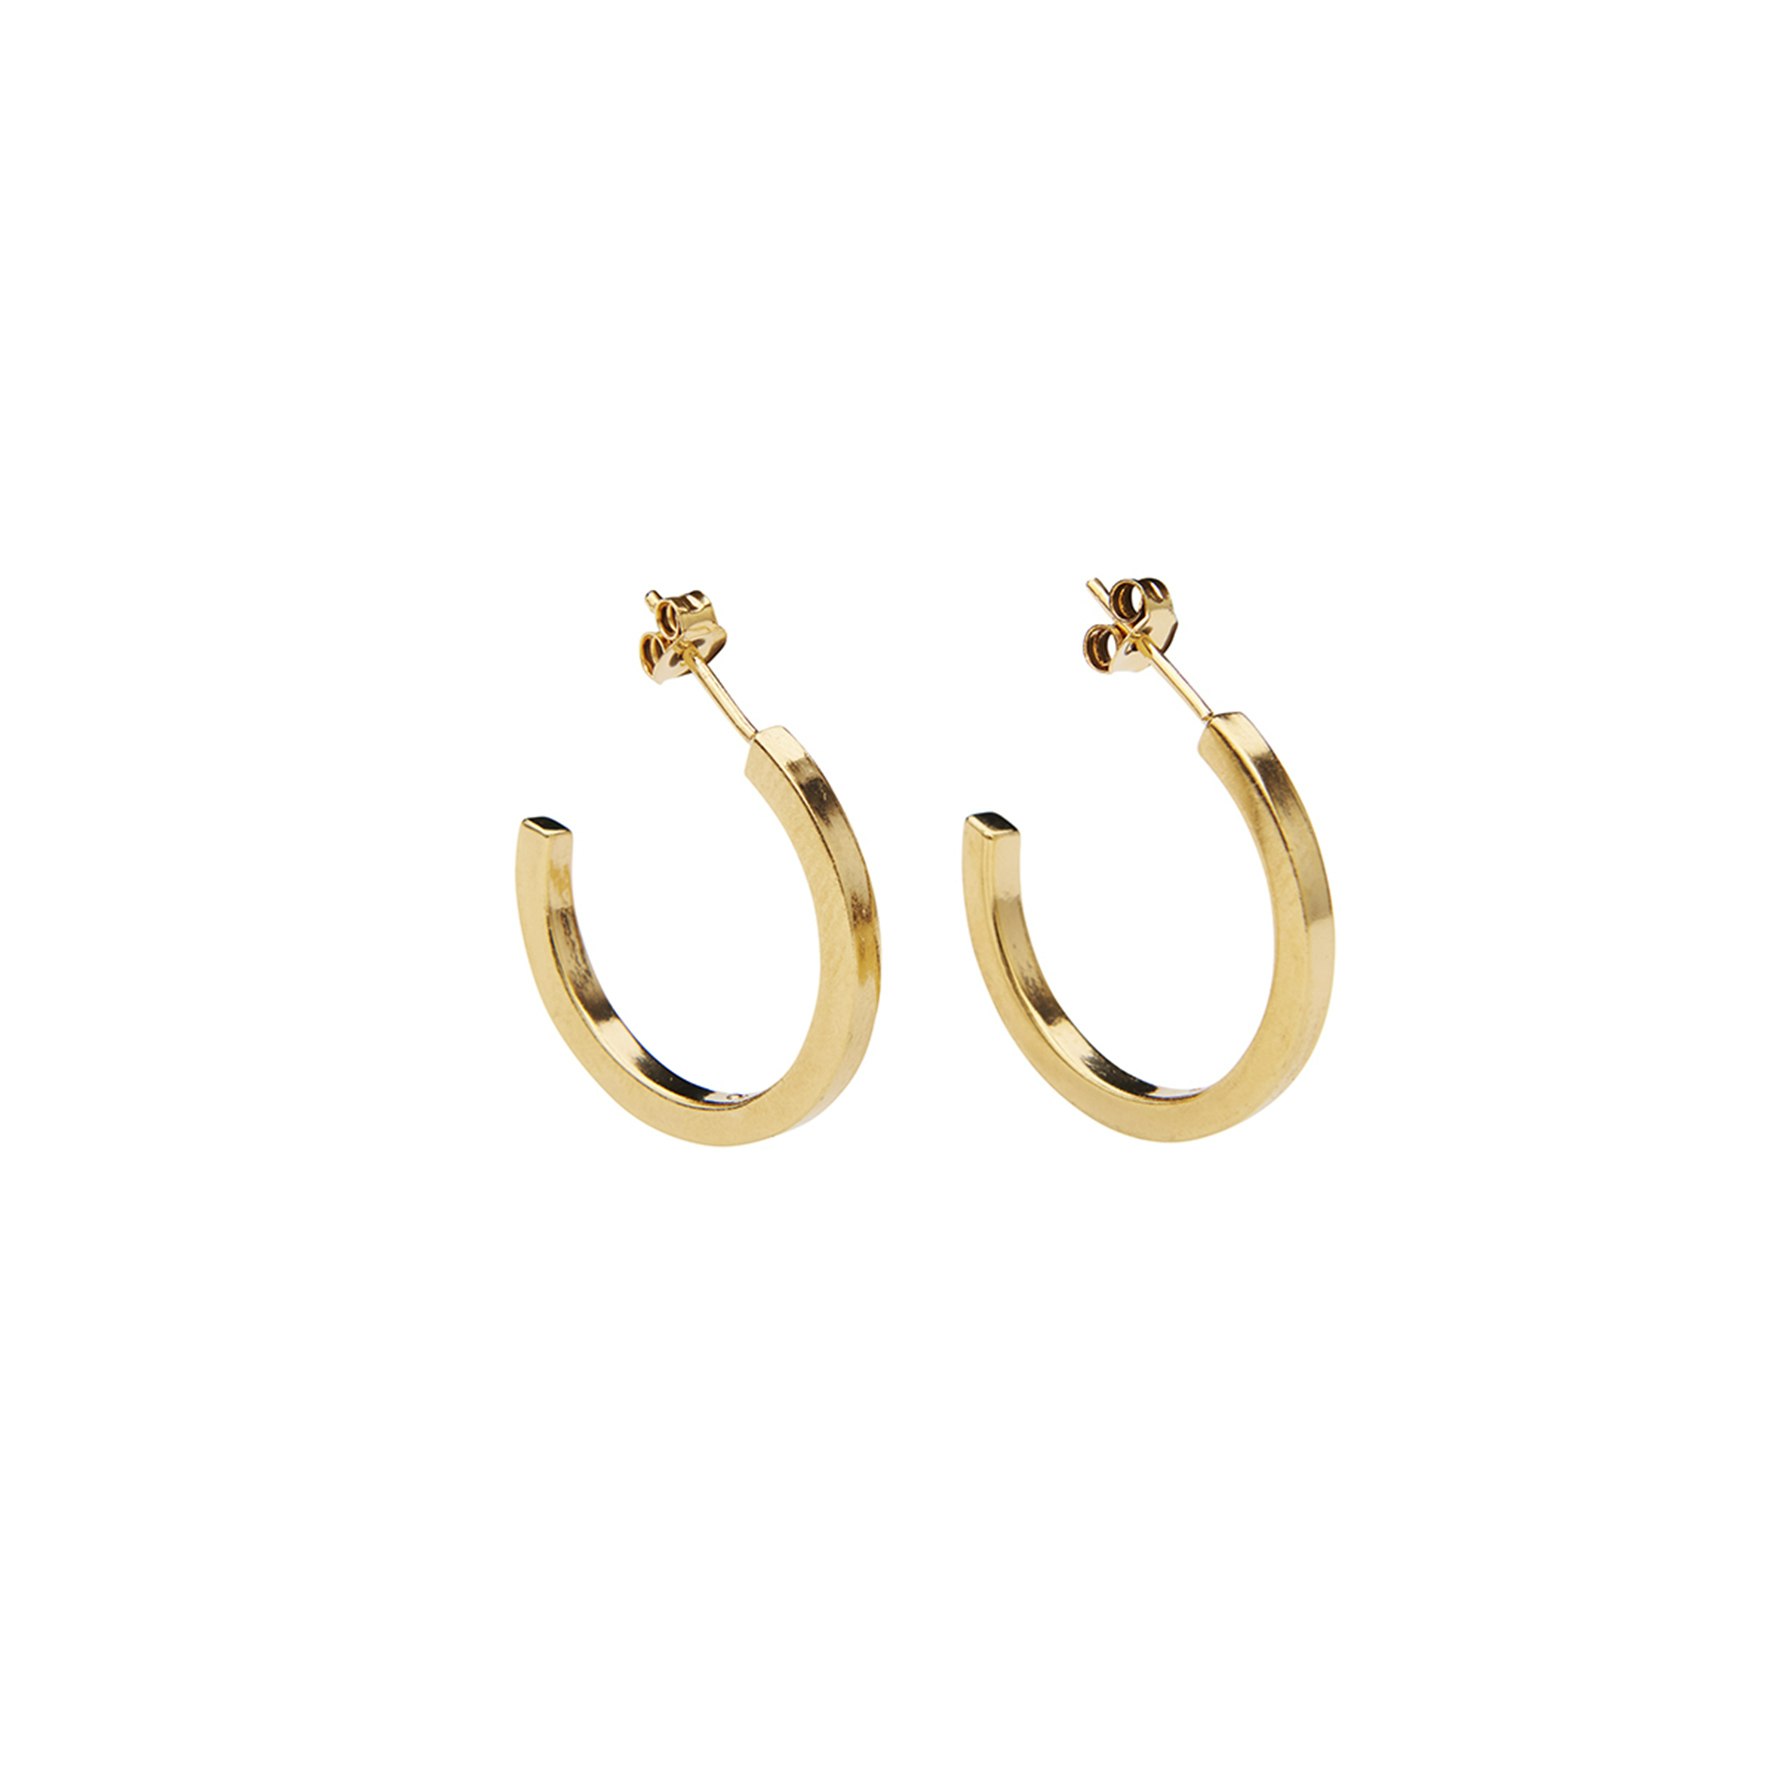 Cerise Studs from Pico in Goldplated Brass